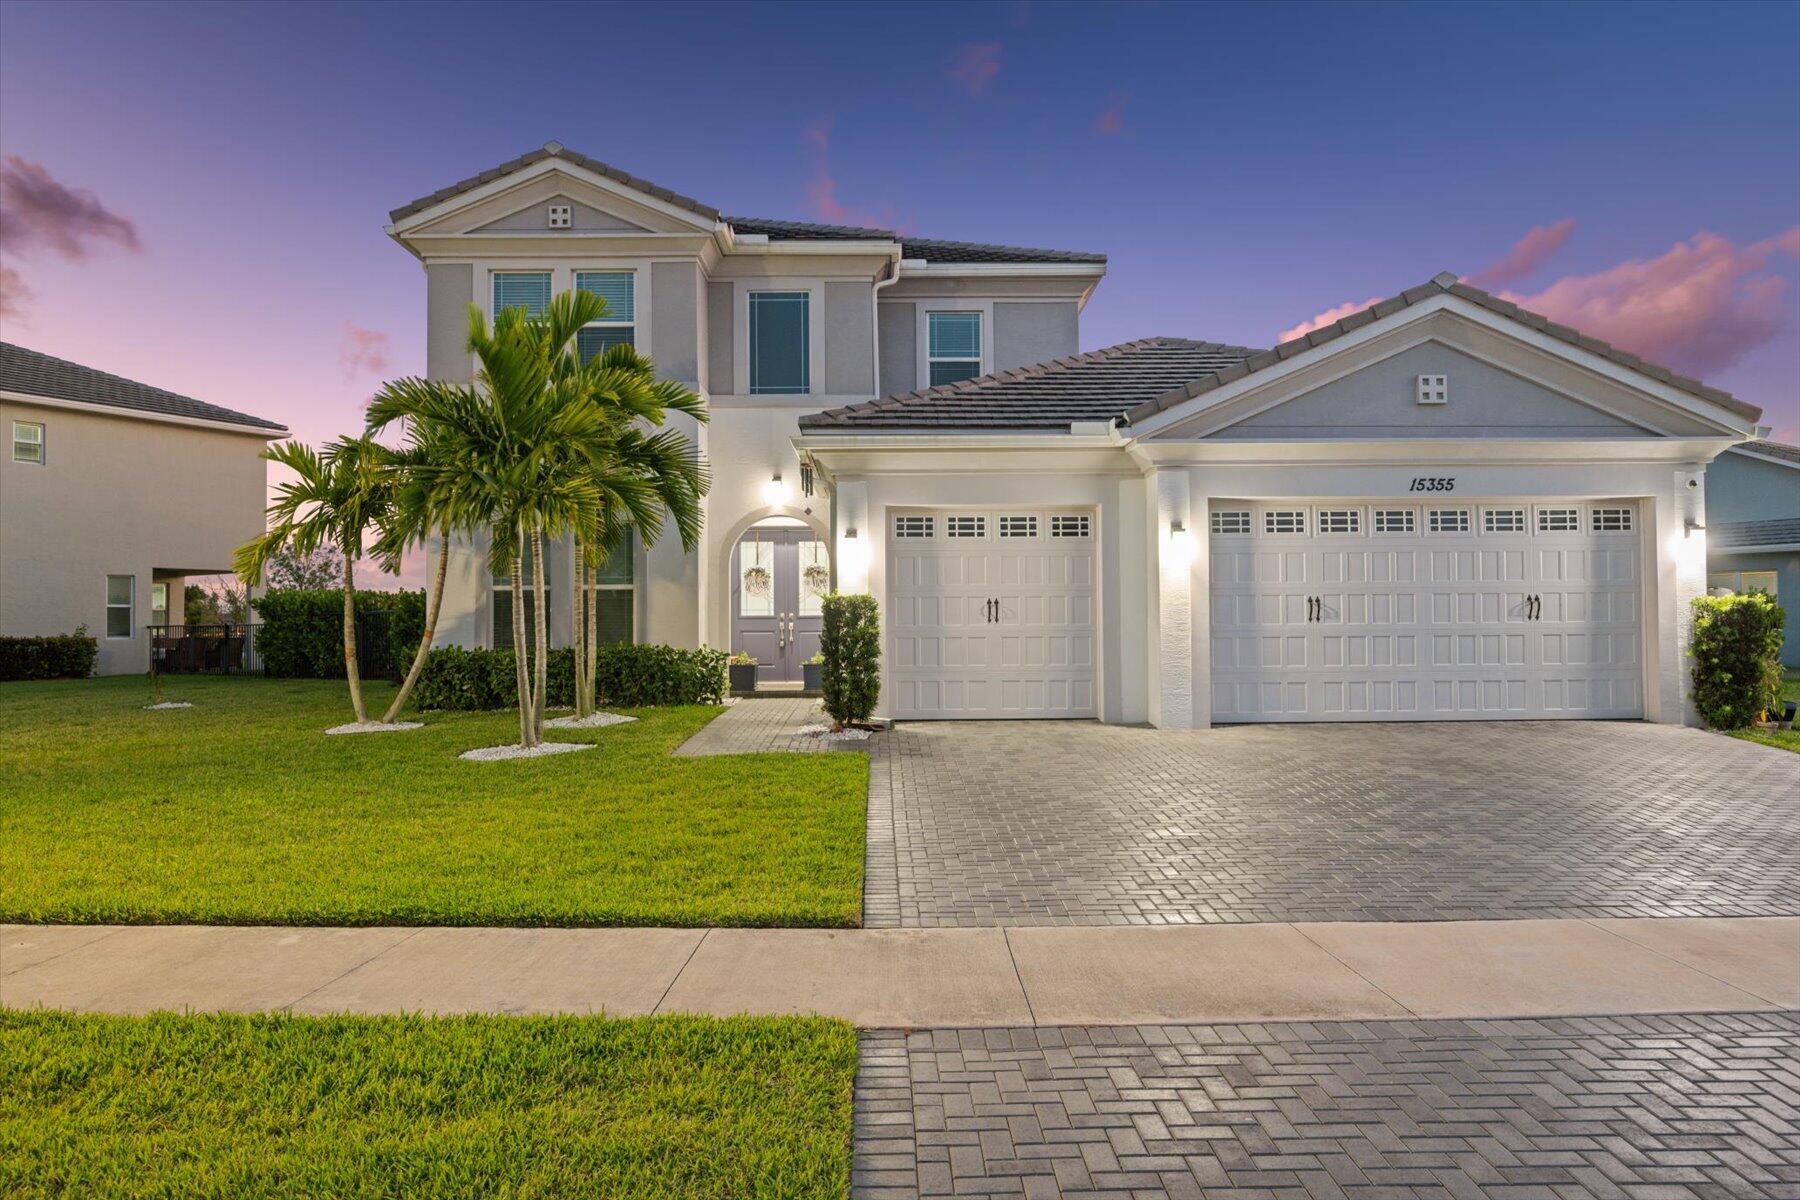 Property for Sale at 15355 Goldfinch Circle, Westlake, Palm Beach County, Florida - Bedrooms: 6 
Bathrooms: 4.5  - $1,299,990